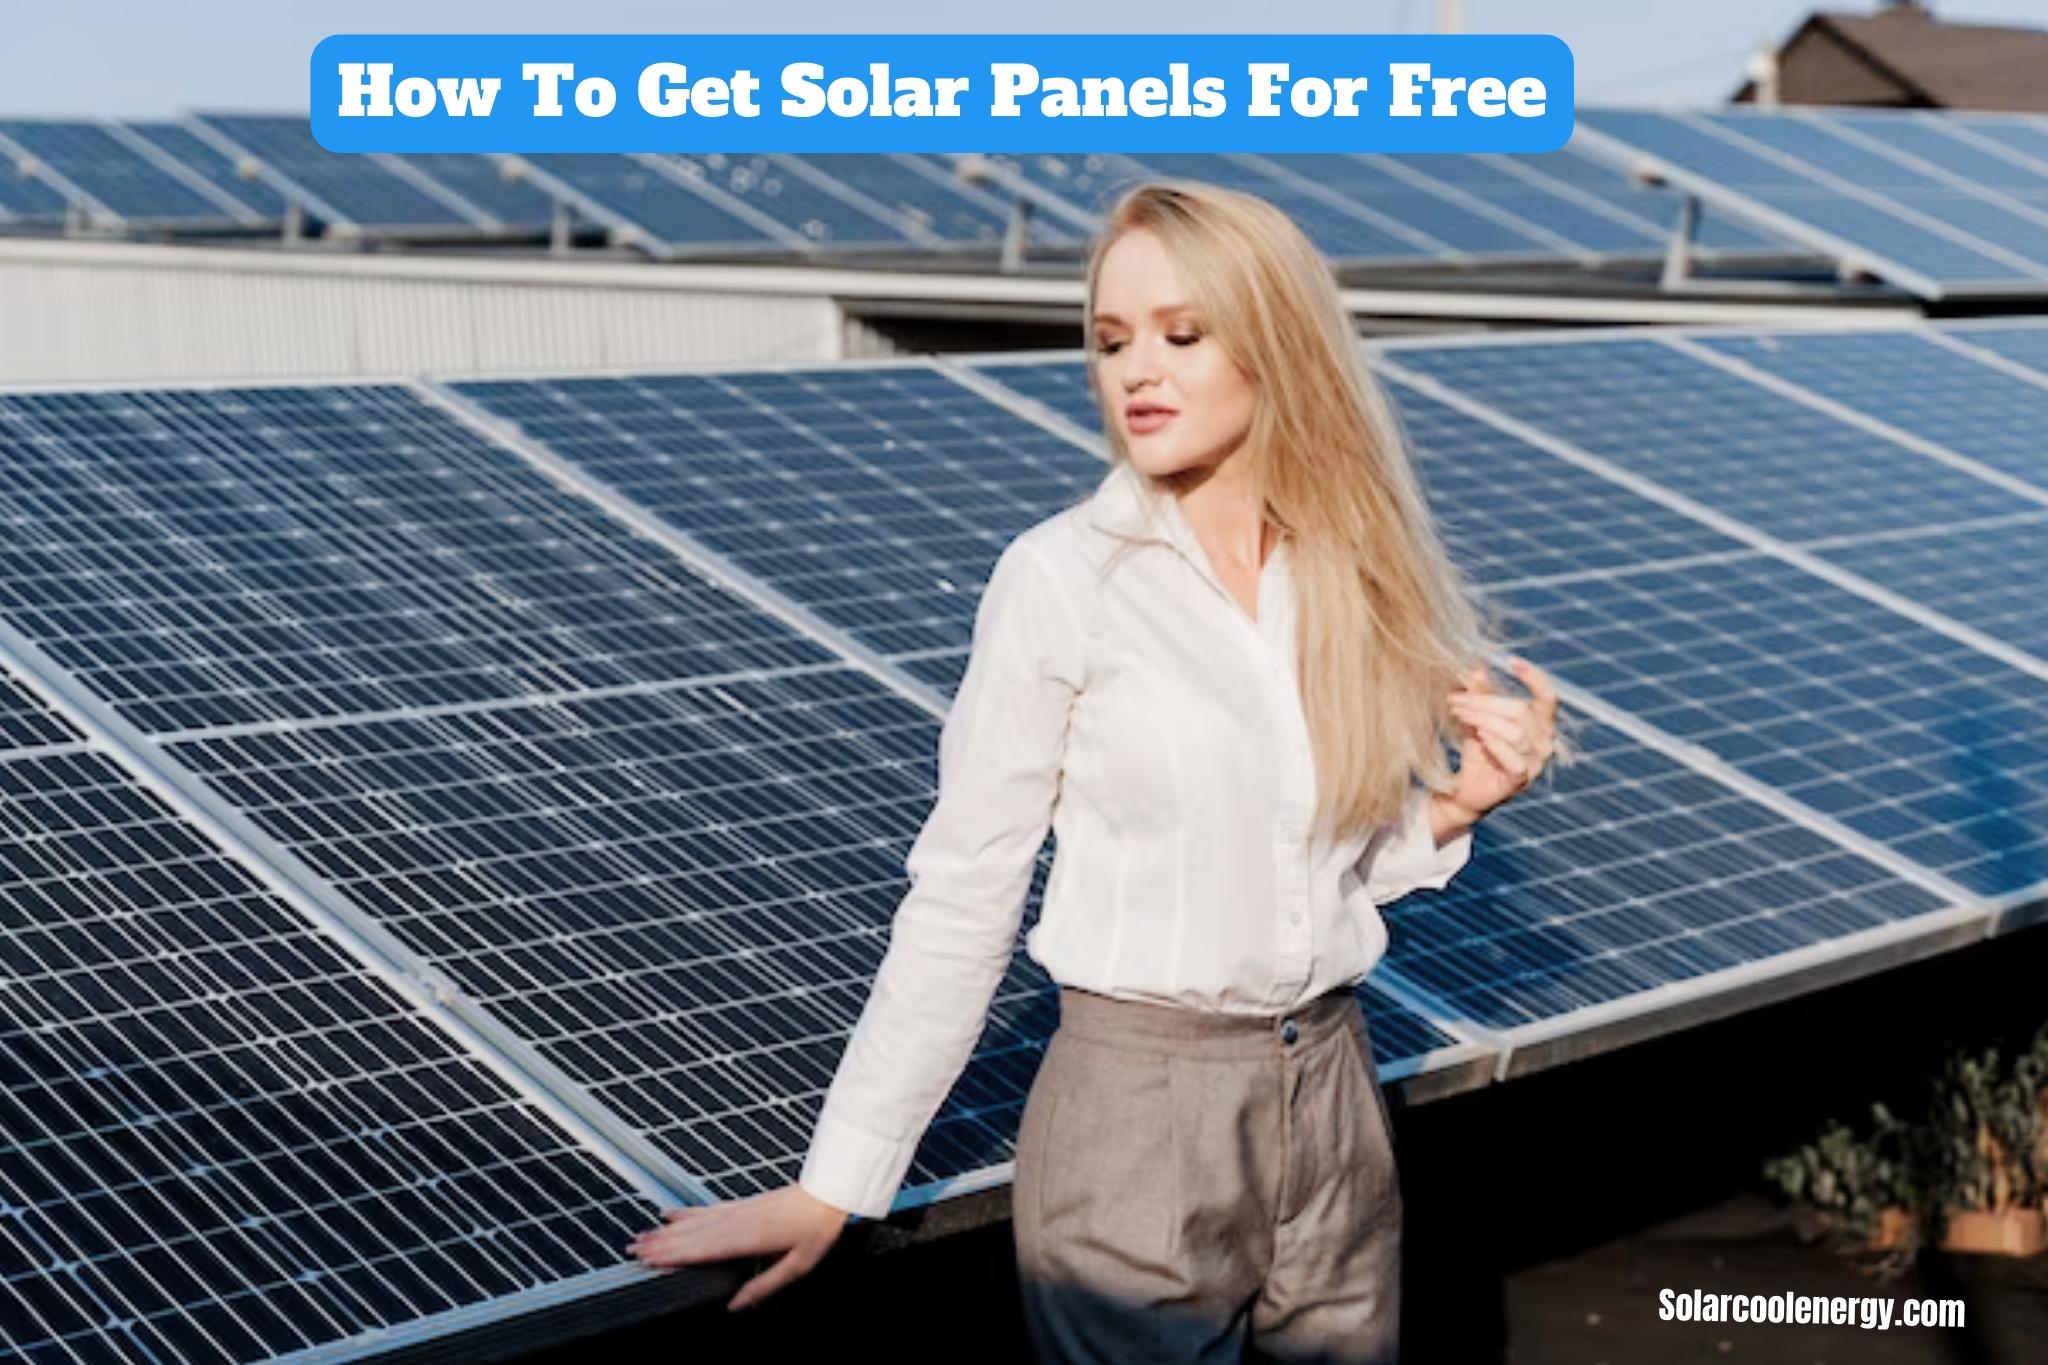 How To Get Solar Panels For Free